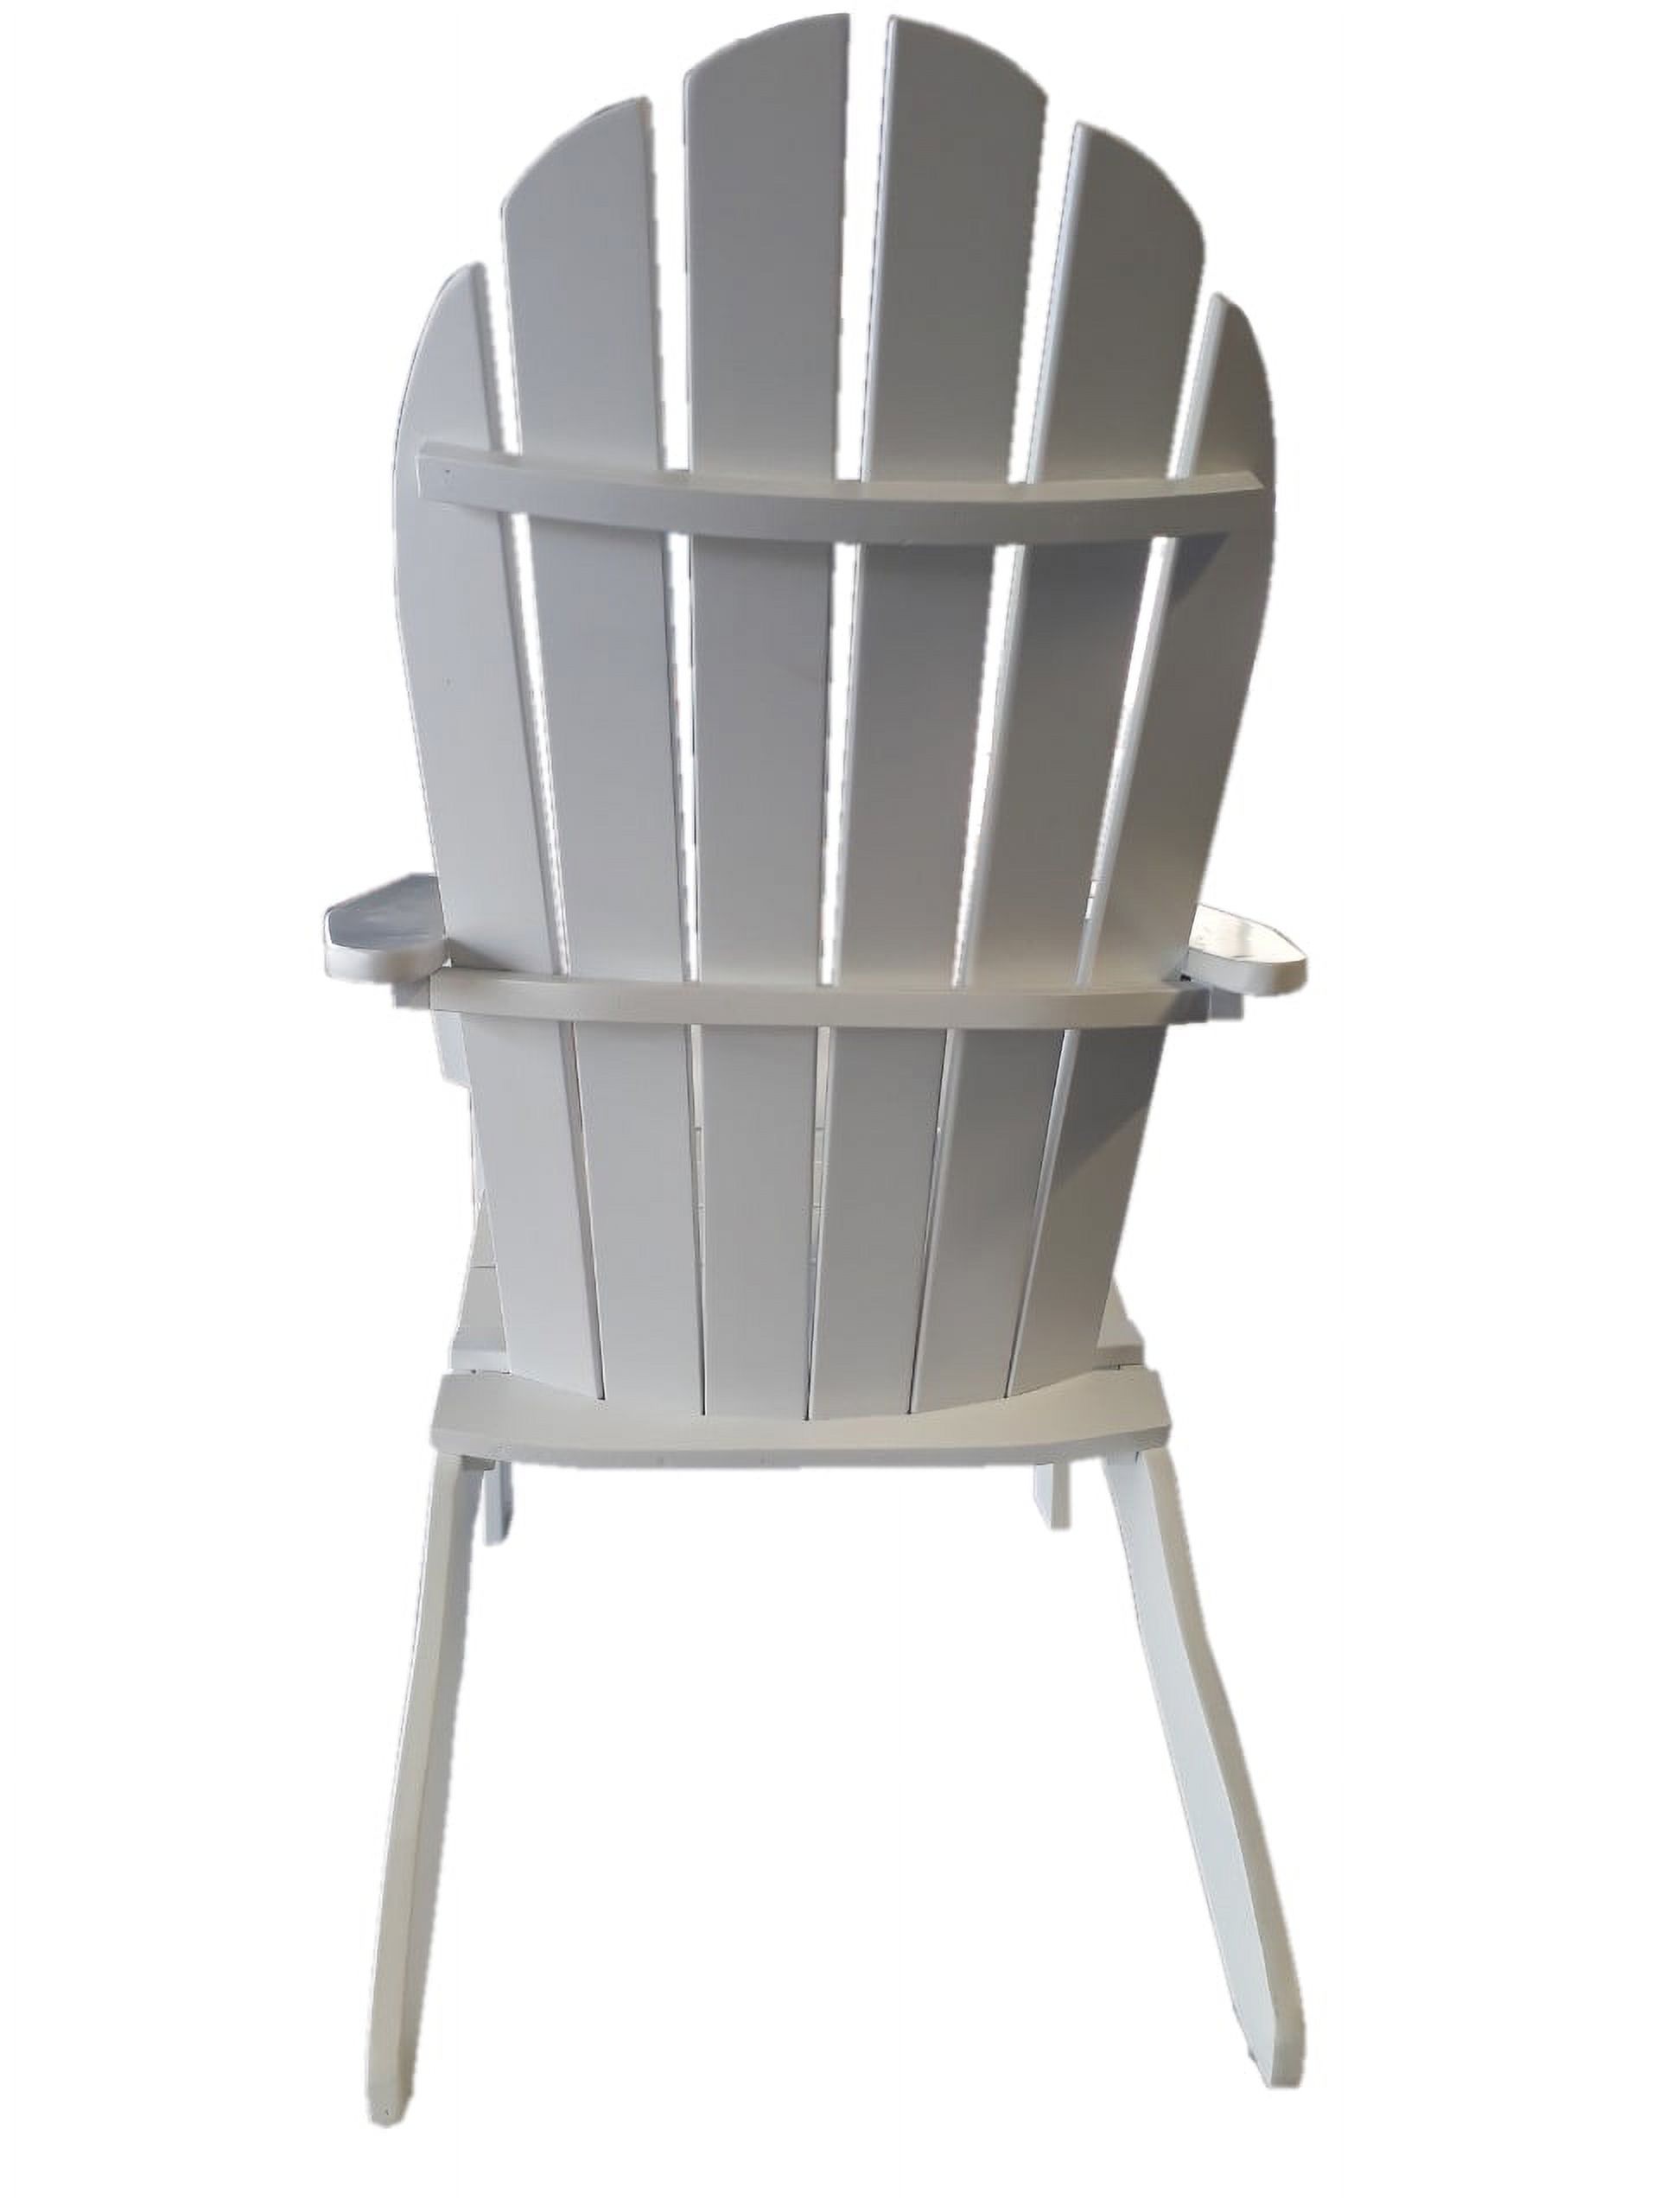 Mainstays Wood Outdoor Adirondack Chair, White Color - image 2 of 8